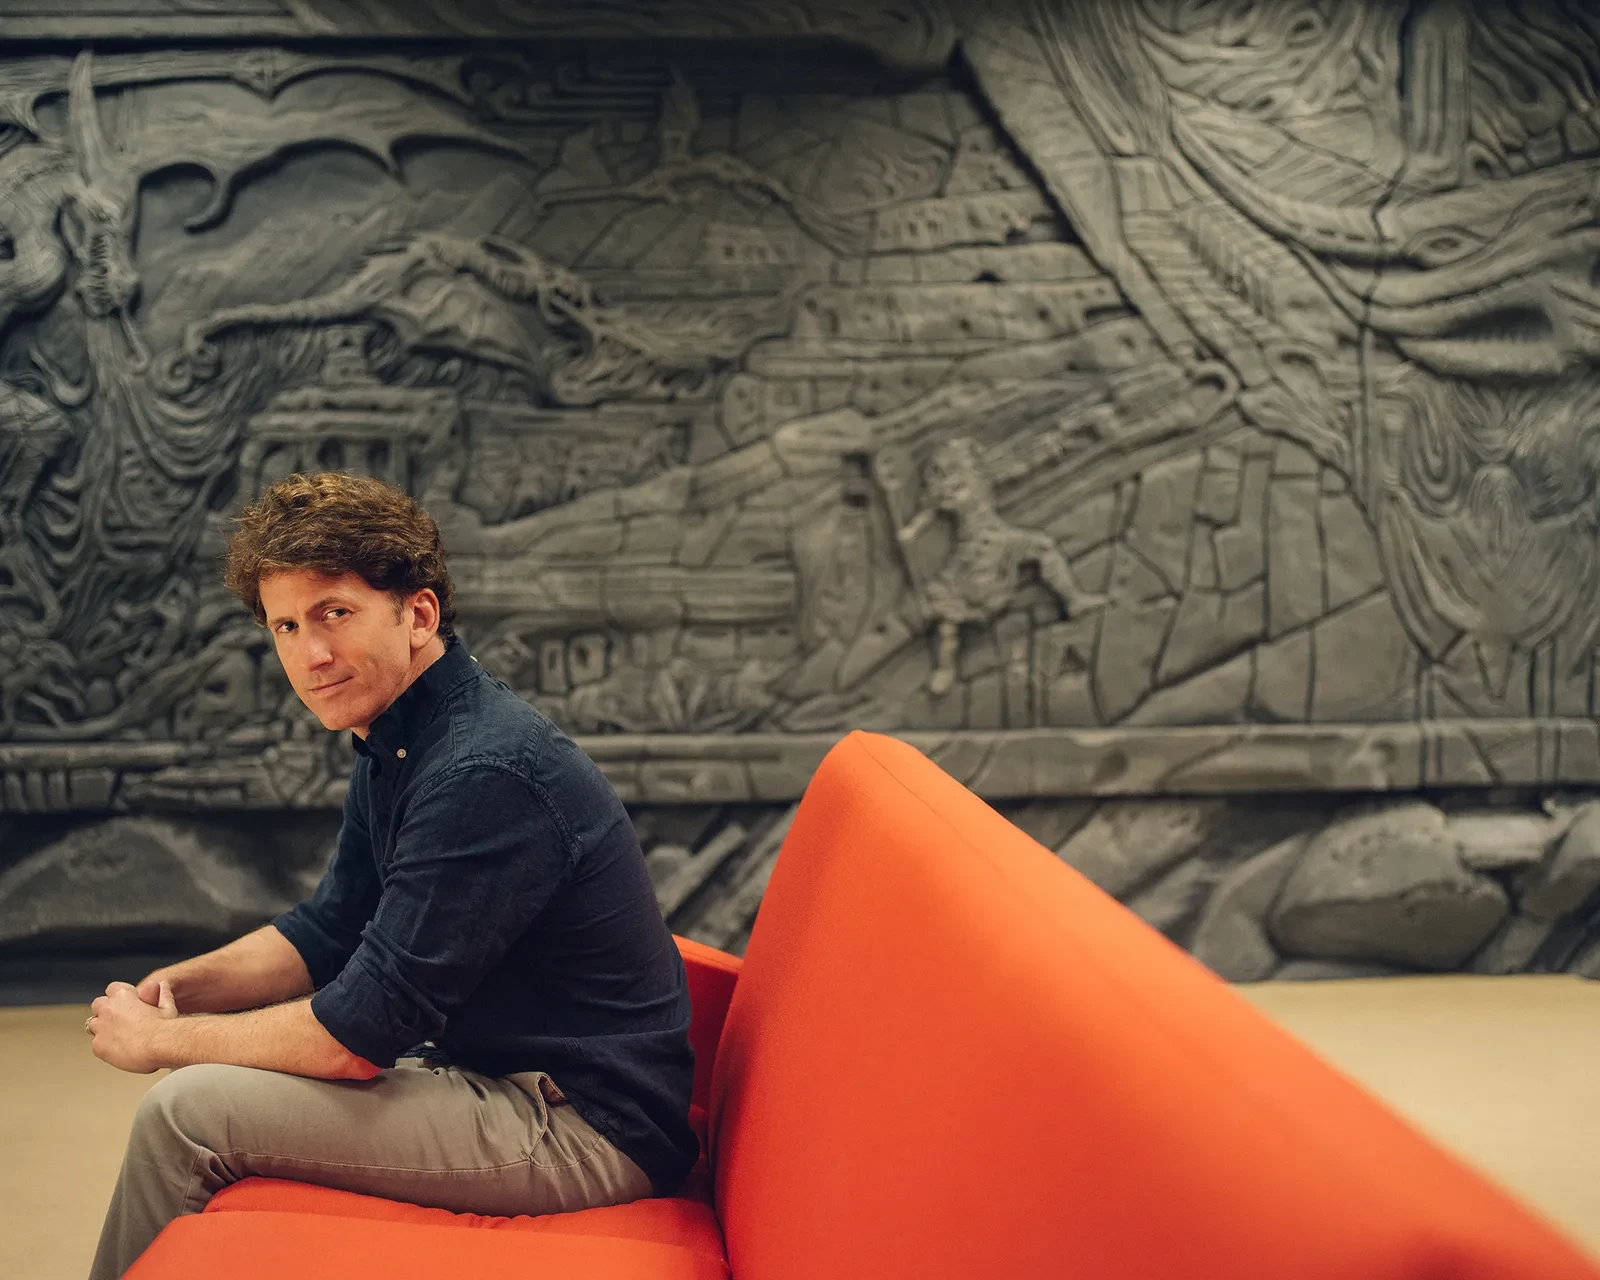 Todd Howard's genius mind helped him climbed the ladder of success